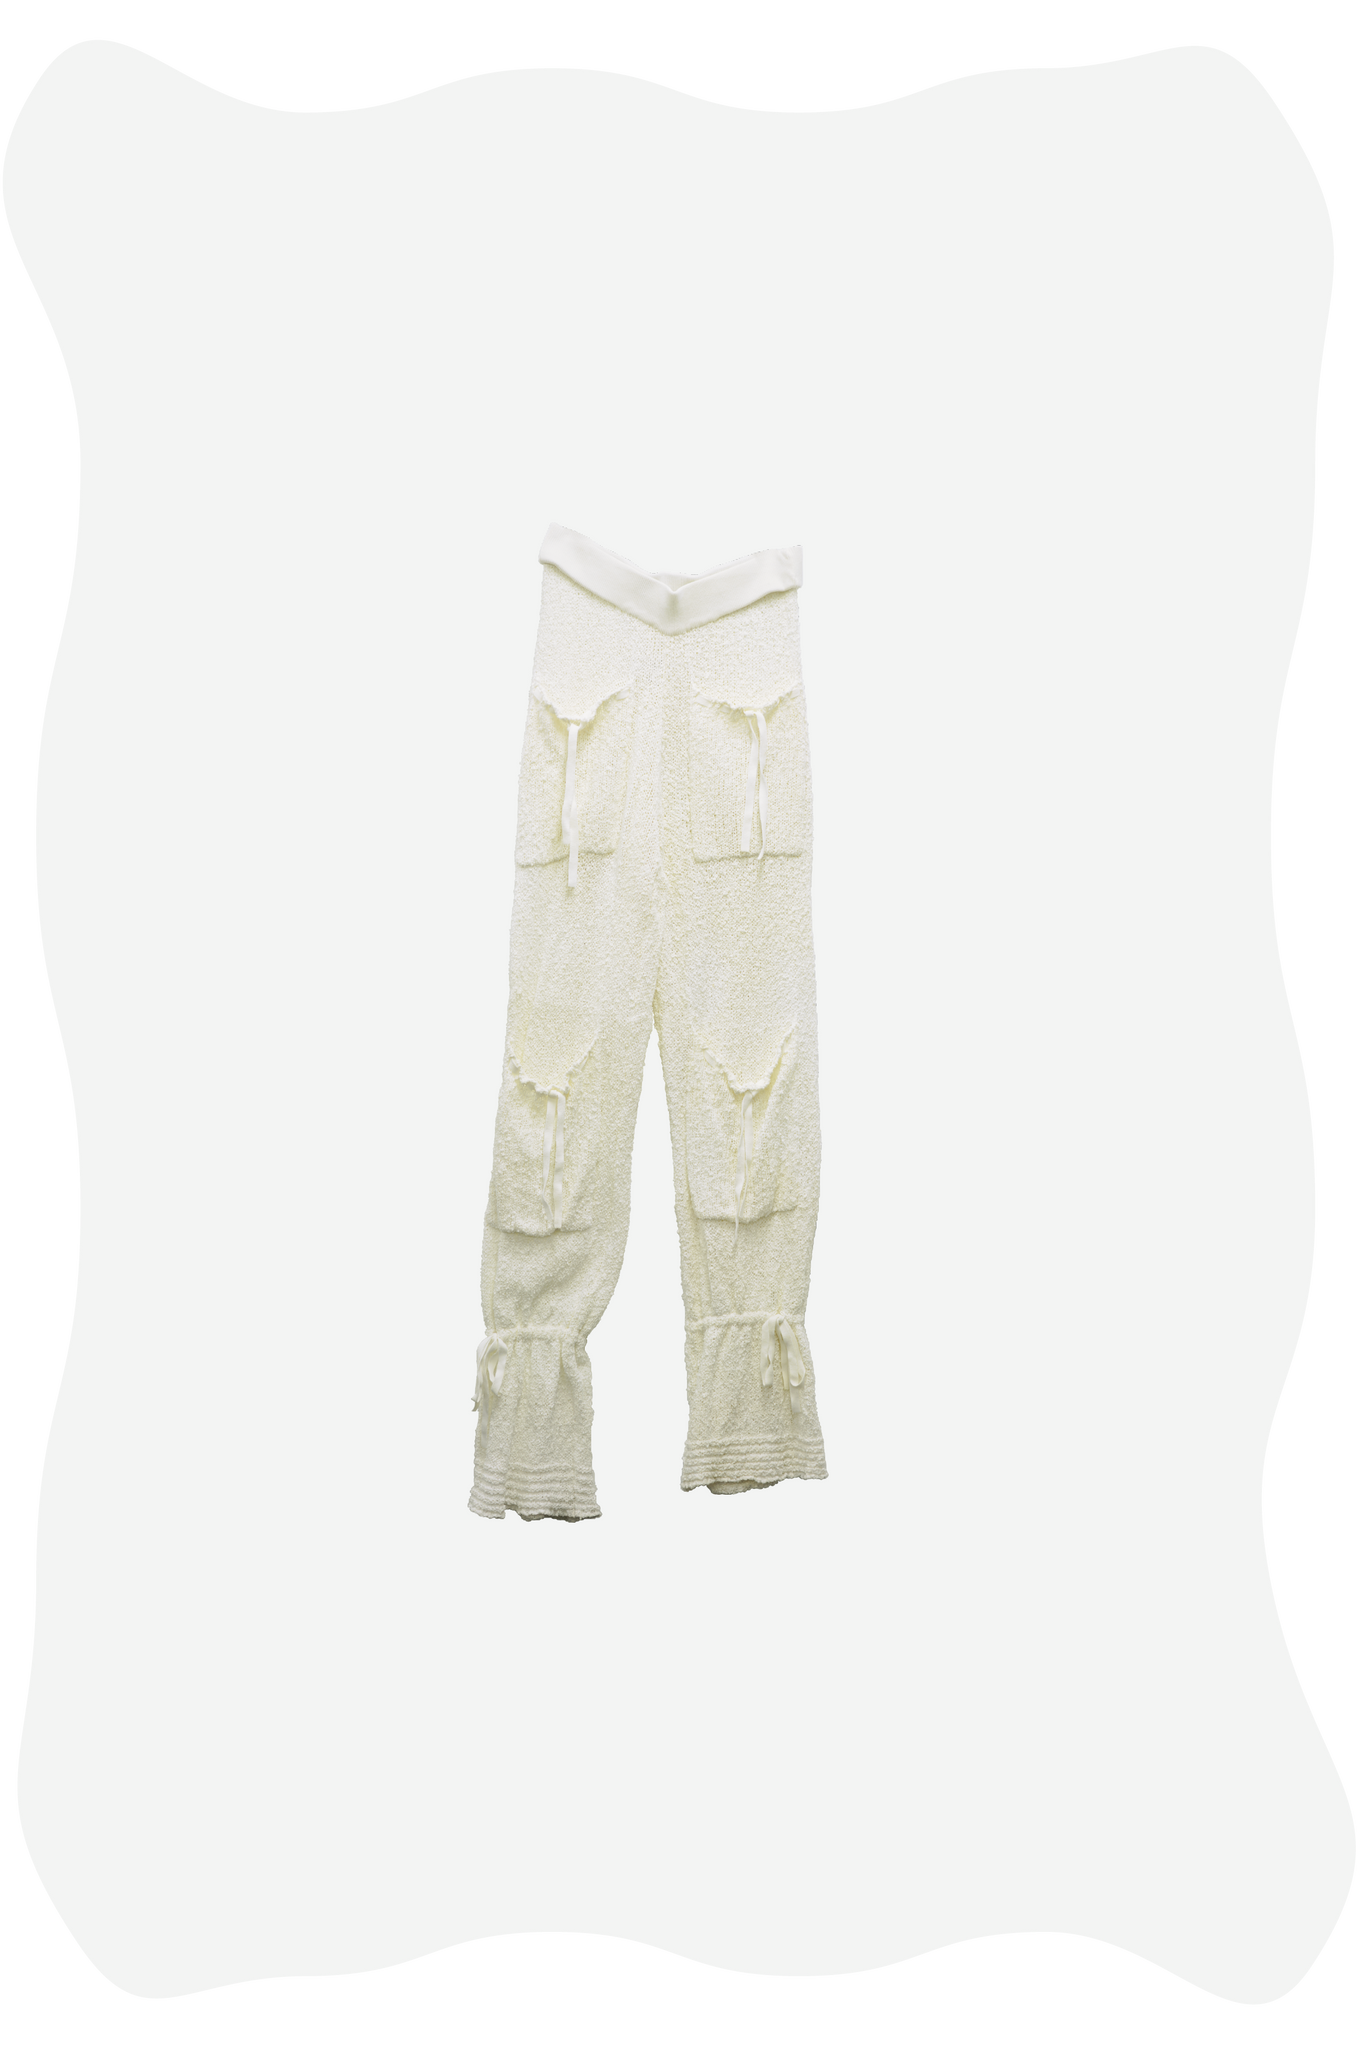 Archives Room: OPENING CEREMONY Pant